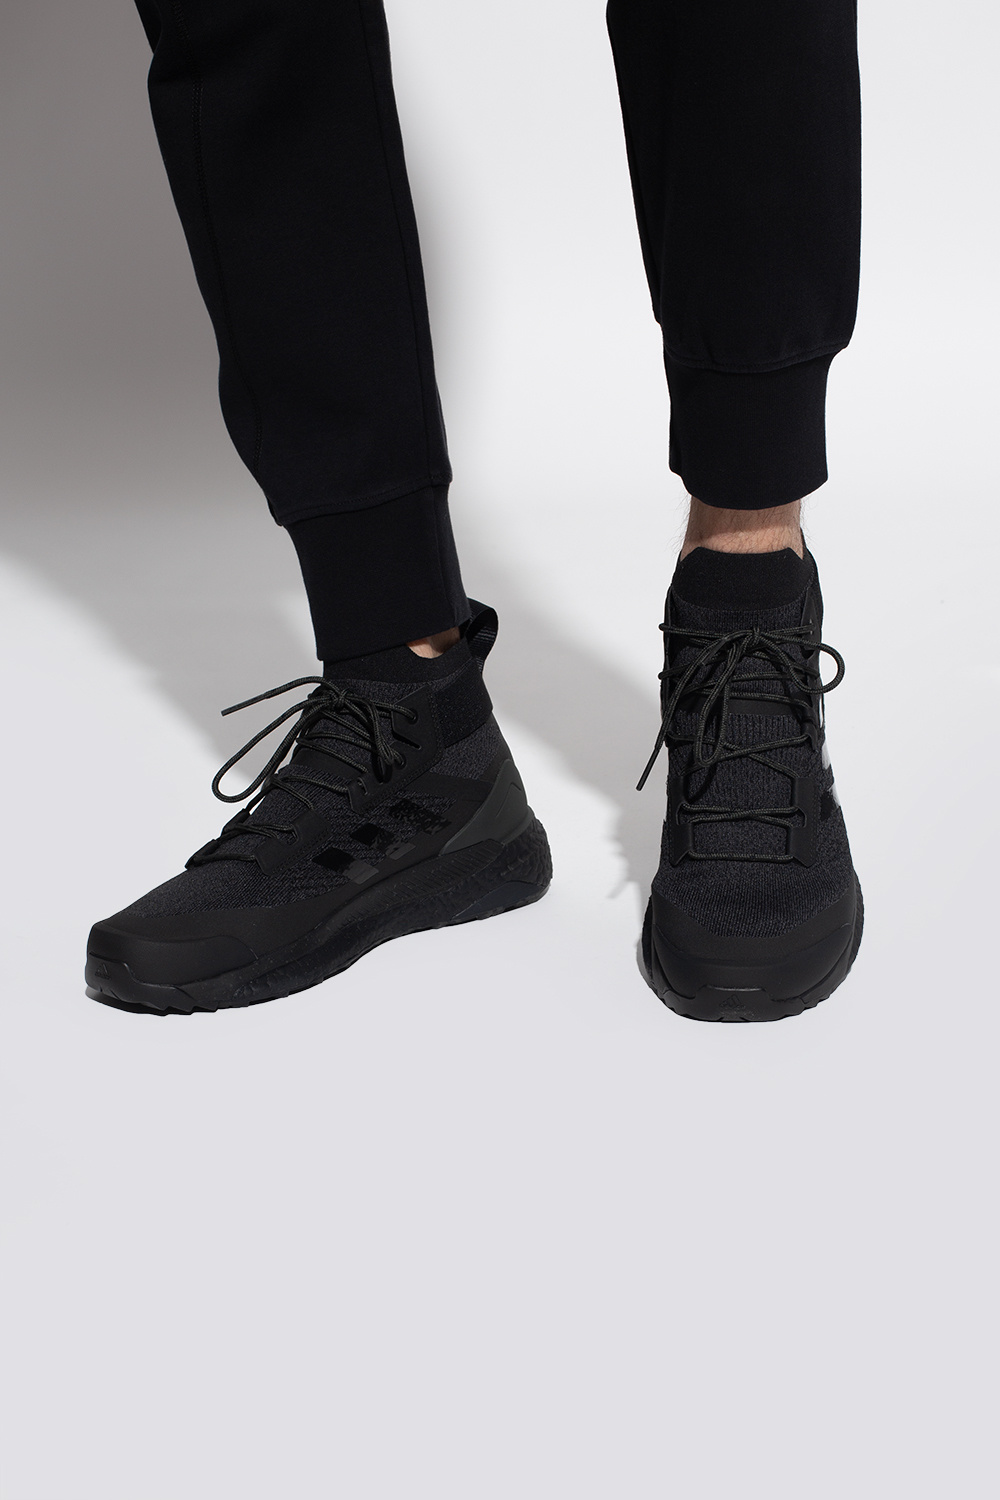 ADIDAS Performance adidas prophere outfit for women black